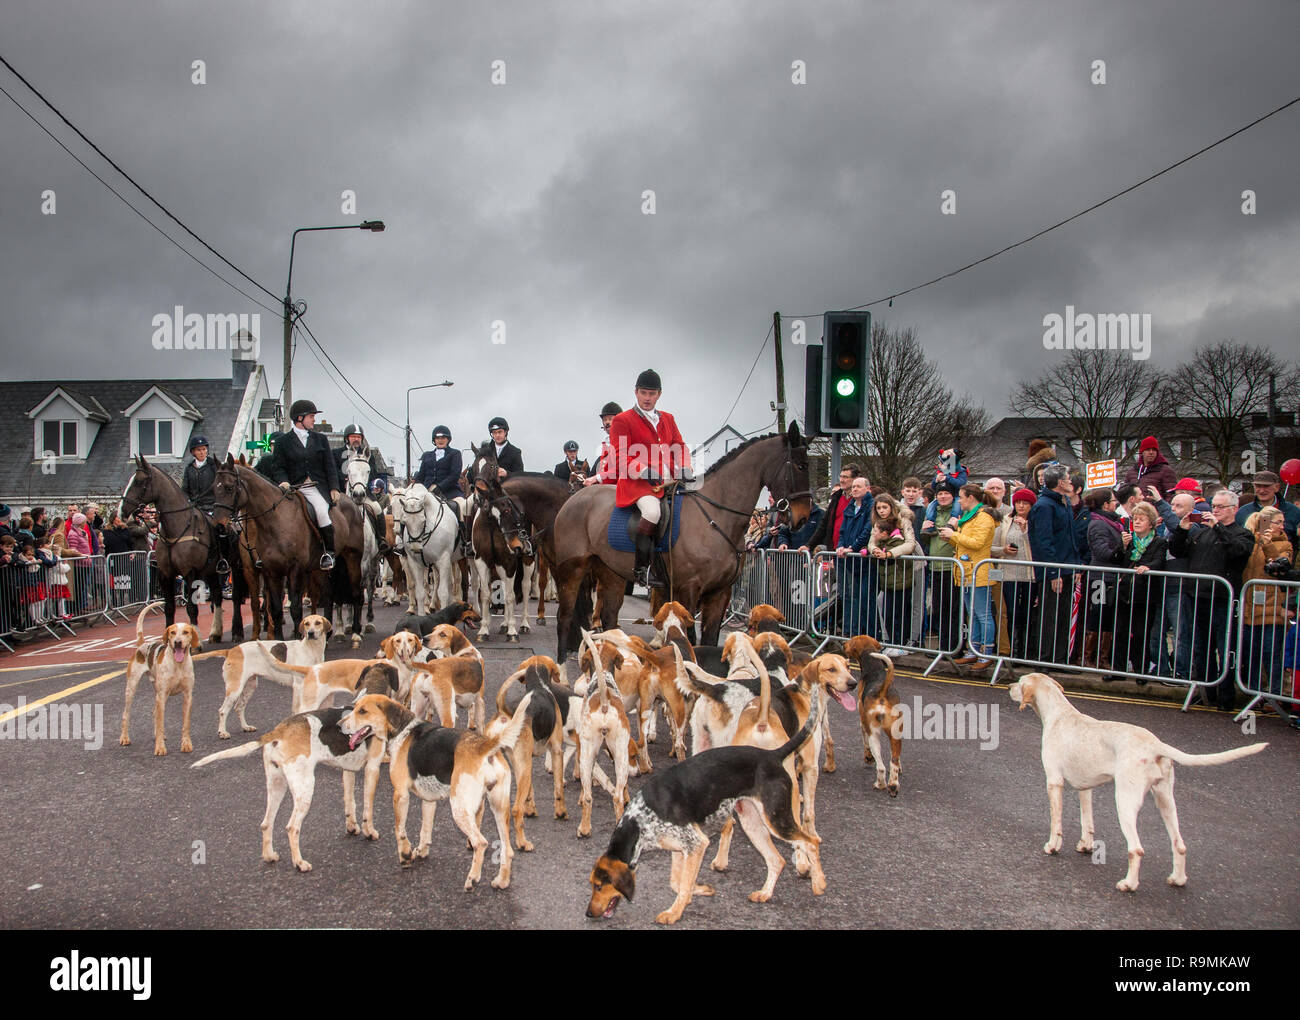 Carrigaline, Cork, Ireland. 26th December, 2018. Members of the South Union Hunt gather  with their hounds for the traditional St Stephen's Day Hunt on Main Street Carrigaline, Co. Cork, Ireland. Credit: David Creedon/Alamy Live News Stock Photo